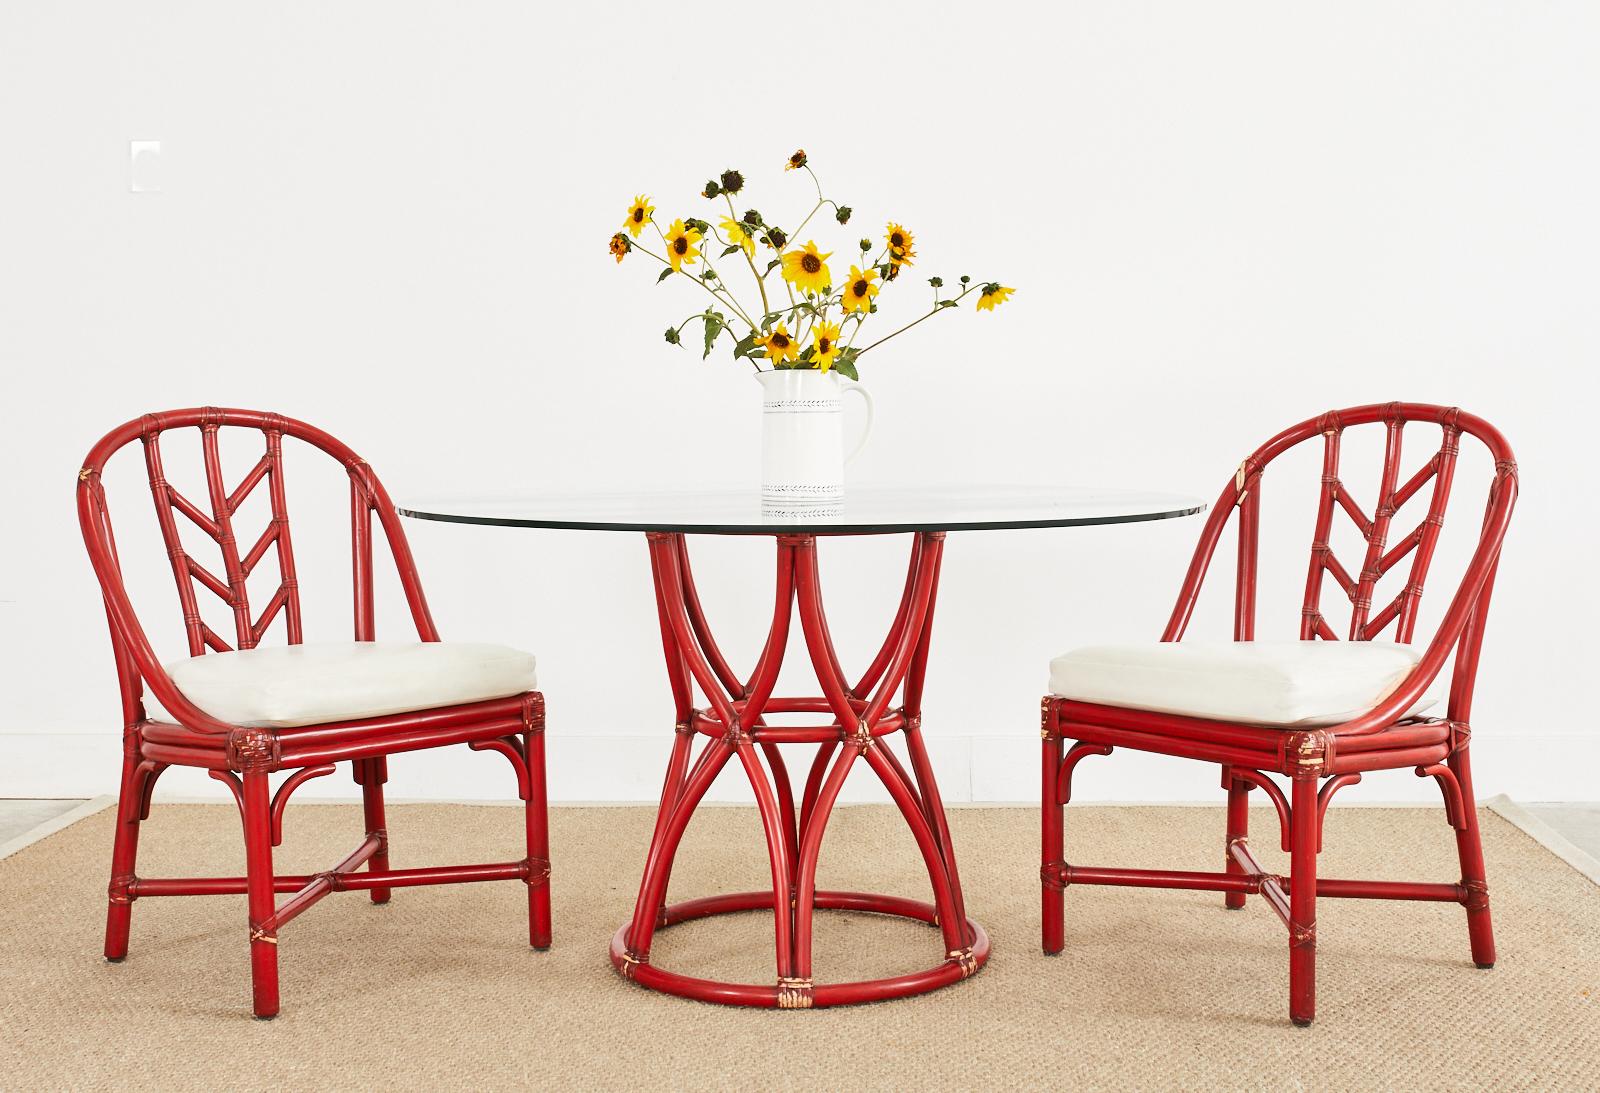 Distinctive McGuire rattan pedestal dining table or center table featuring a whimsical red lacquered finish. The table is crafted from rattan poles in a basket design having an hourglass or waisted form. Excellent joinery and craftsmanship with an